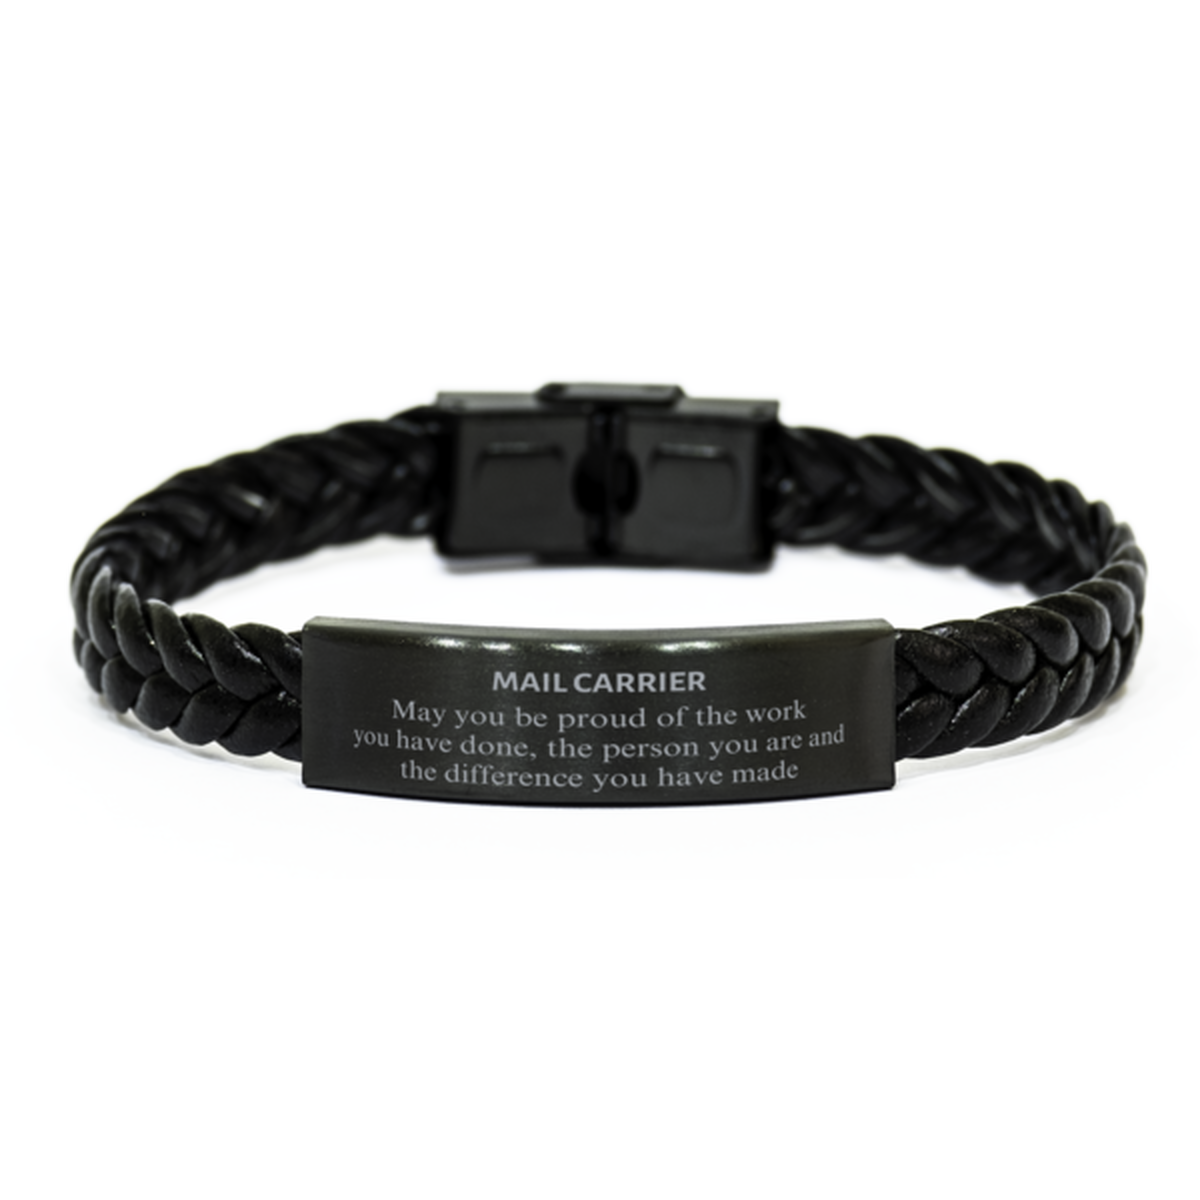 Mail Carrier May you be proud of the work you have done, Retirement Mail Carrier Braided Leather Bracelet for Colleague Appreciation Gifts Amazing for Mail Carrier